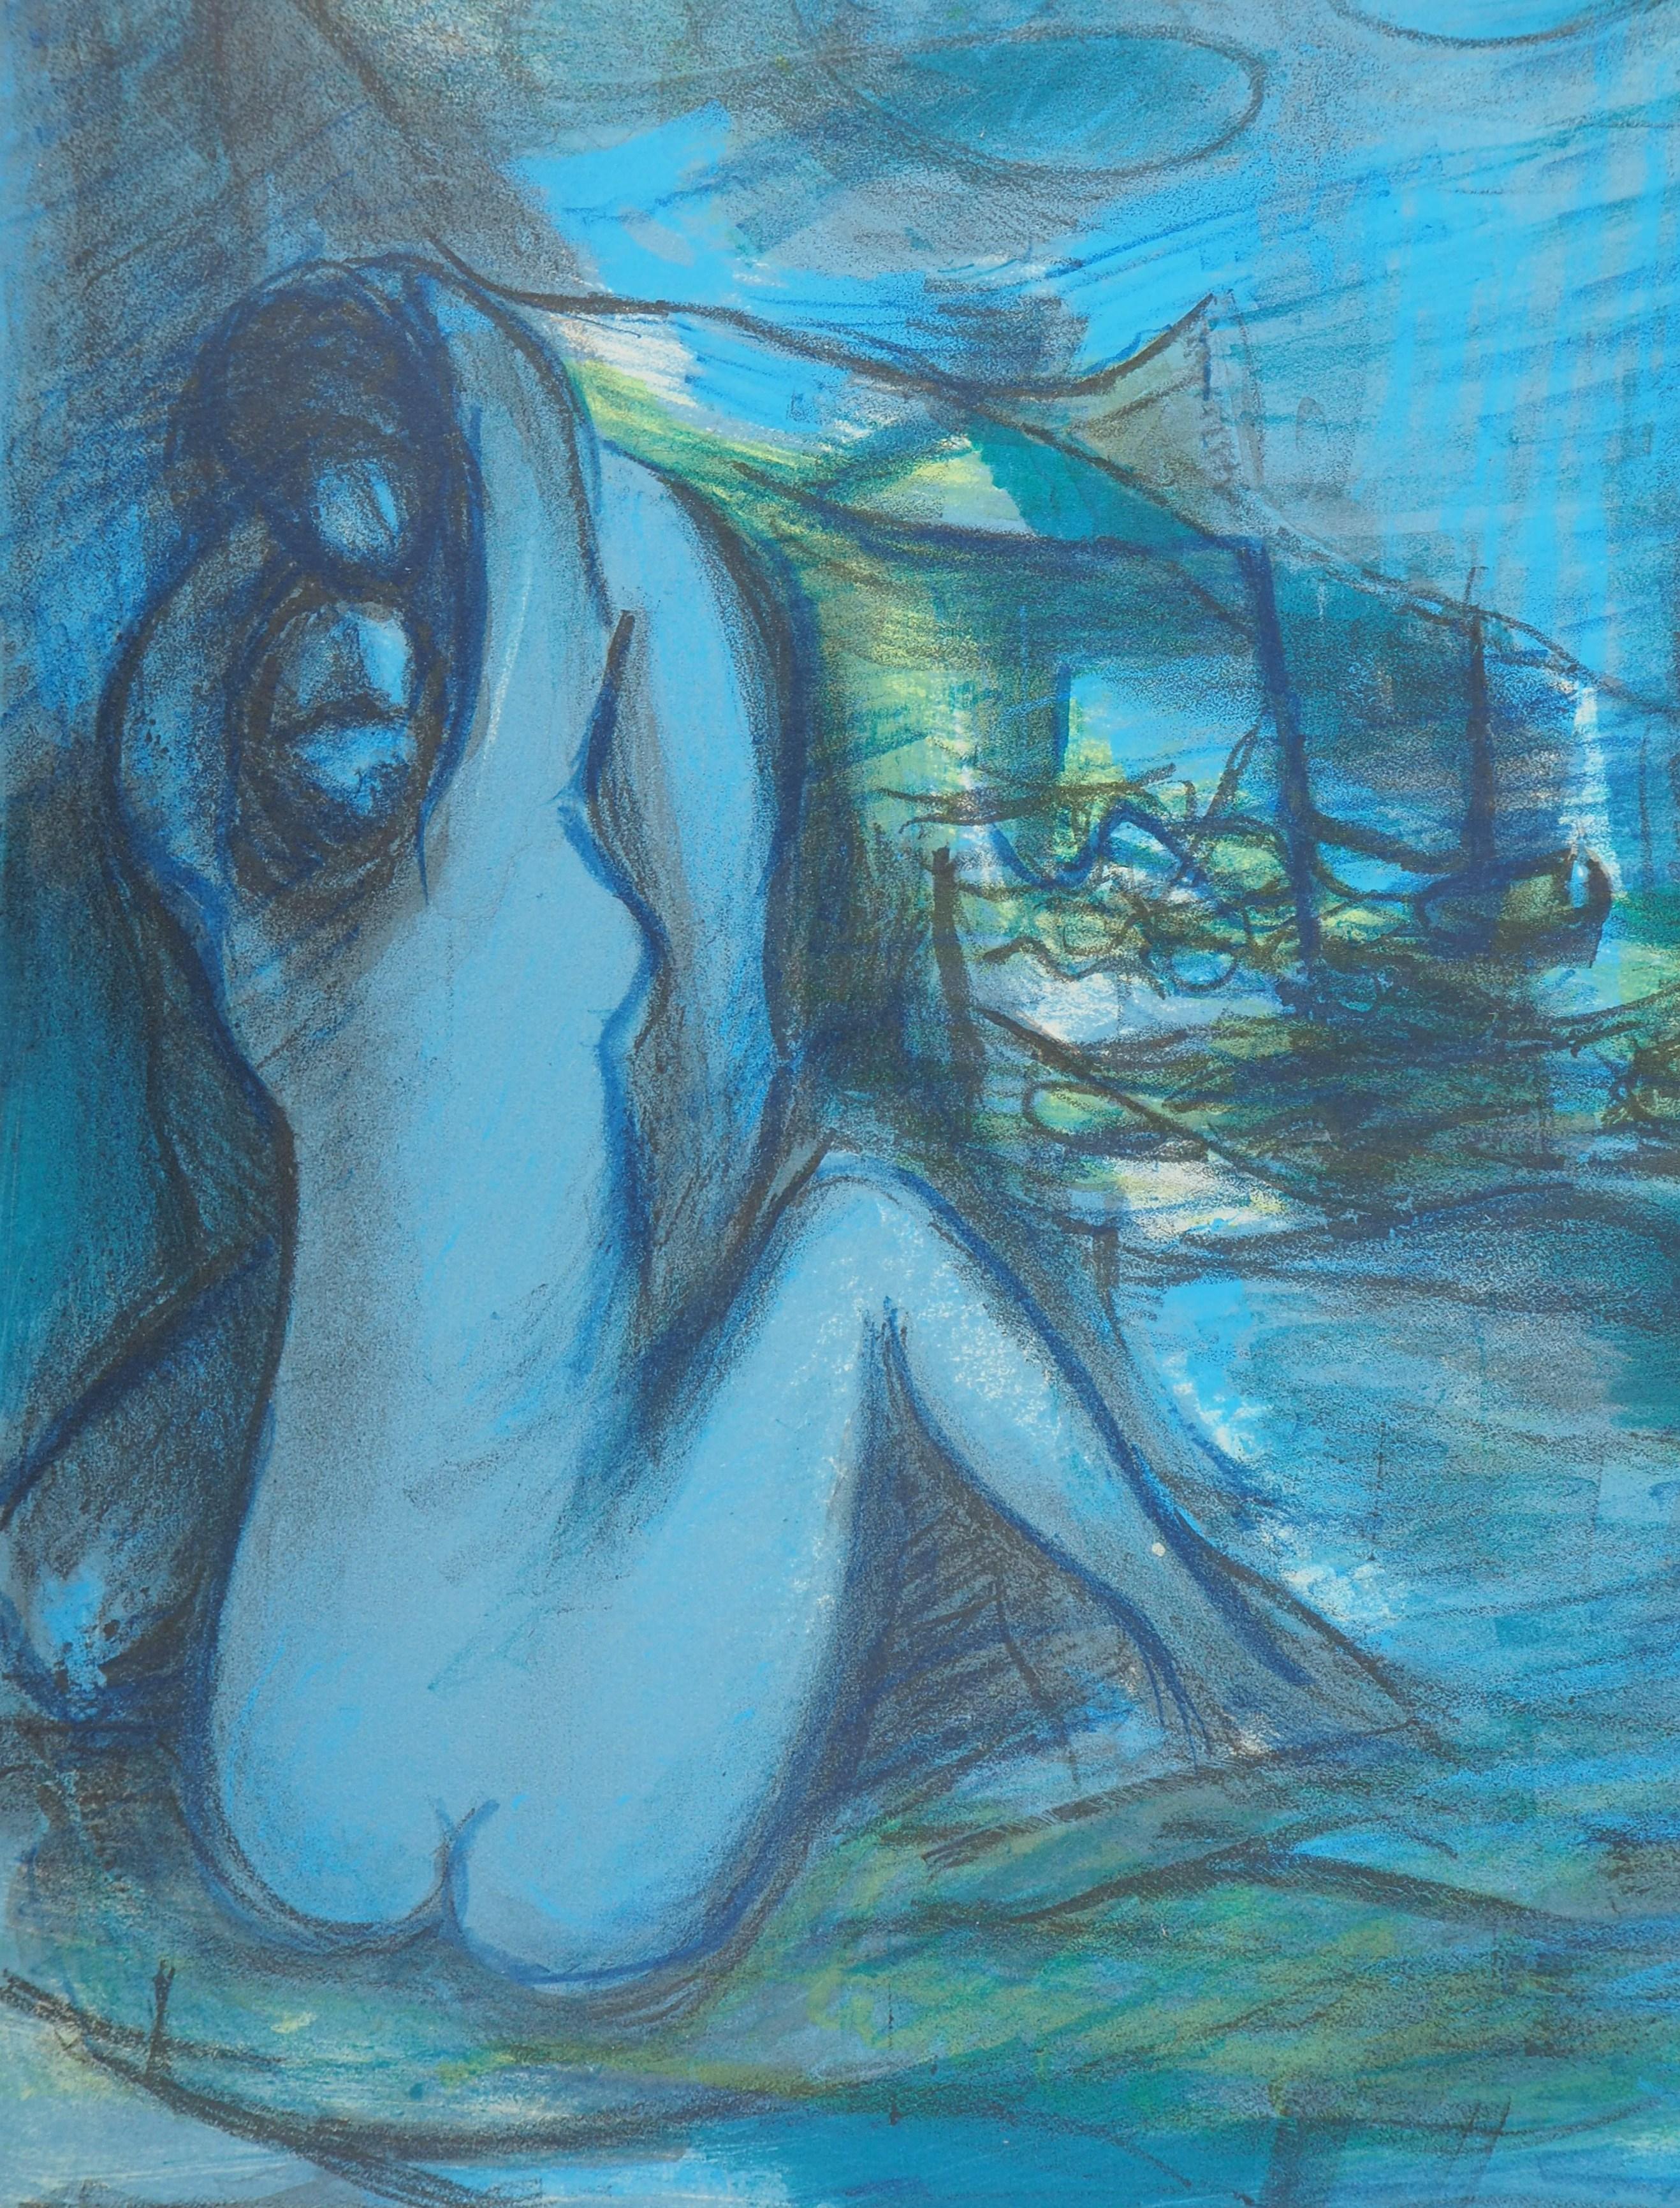 Lovers at the Beach - Original handsigned lithograph - Blue Figurative Print by Marcel Mouly